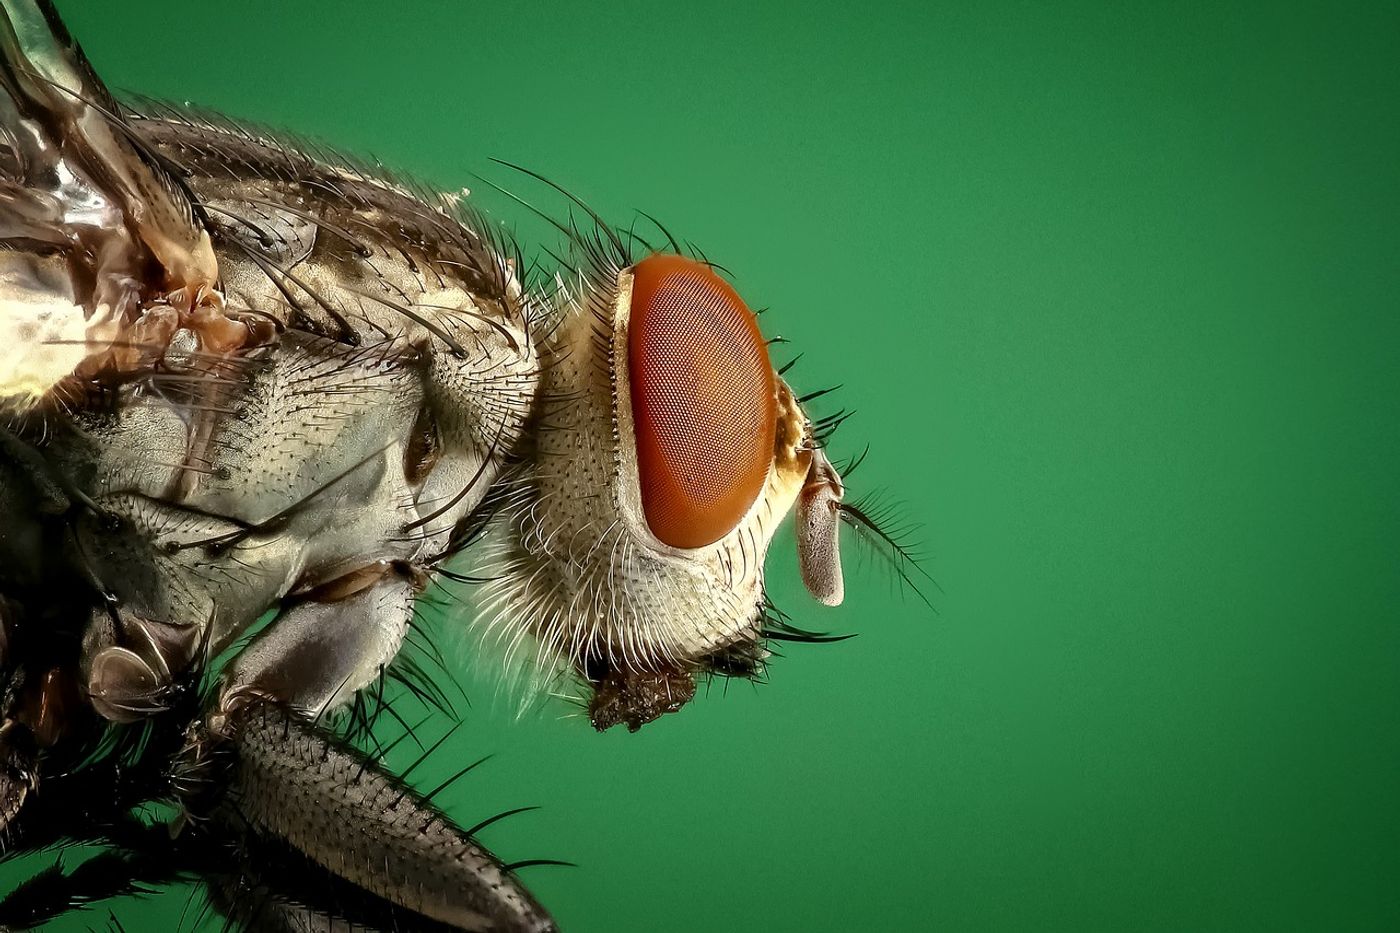 A close-up image of a common house fly.